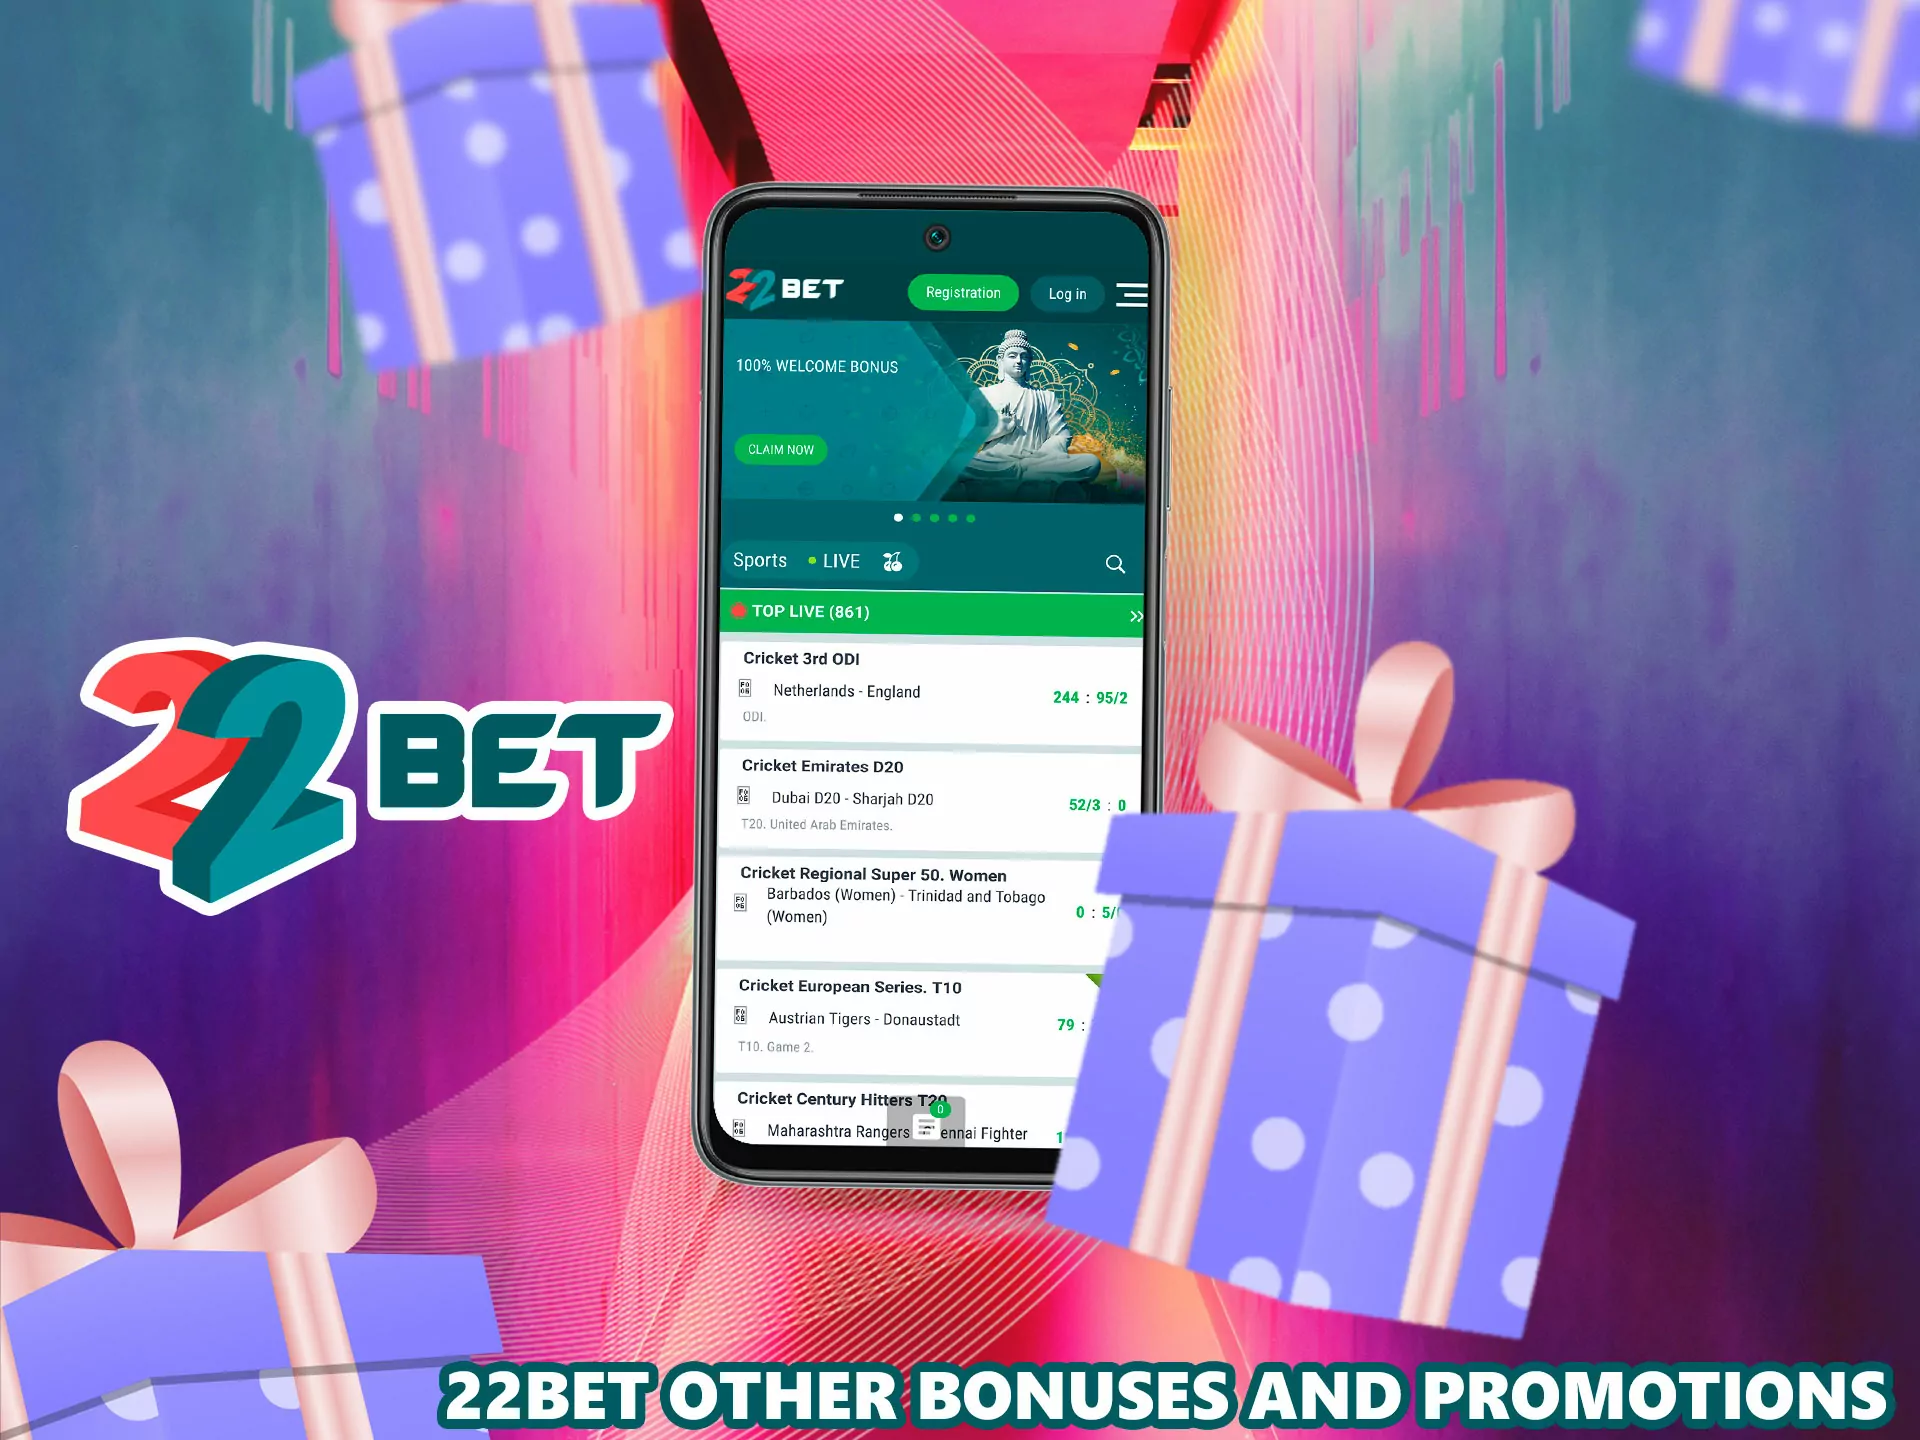 In addition to the welcome promotion, the bookmaker offers a lot of other interesting bonuses.